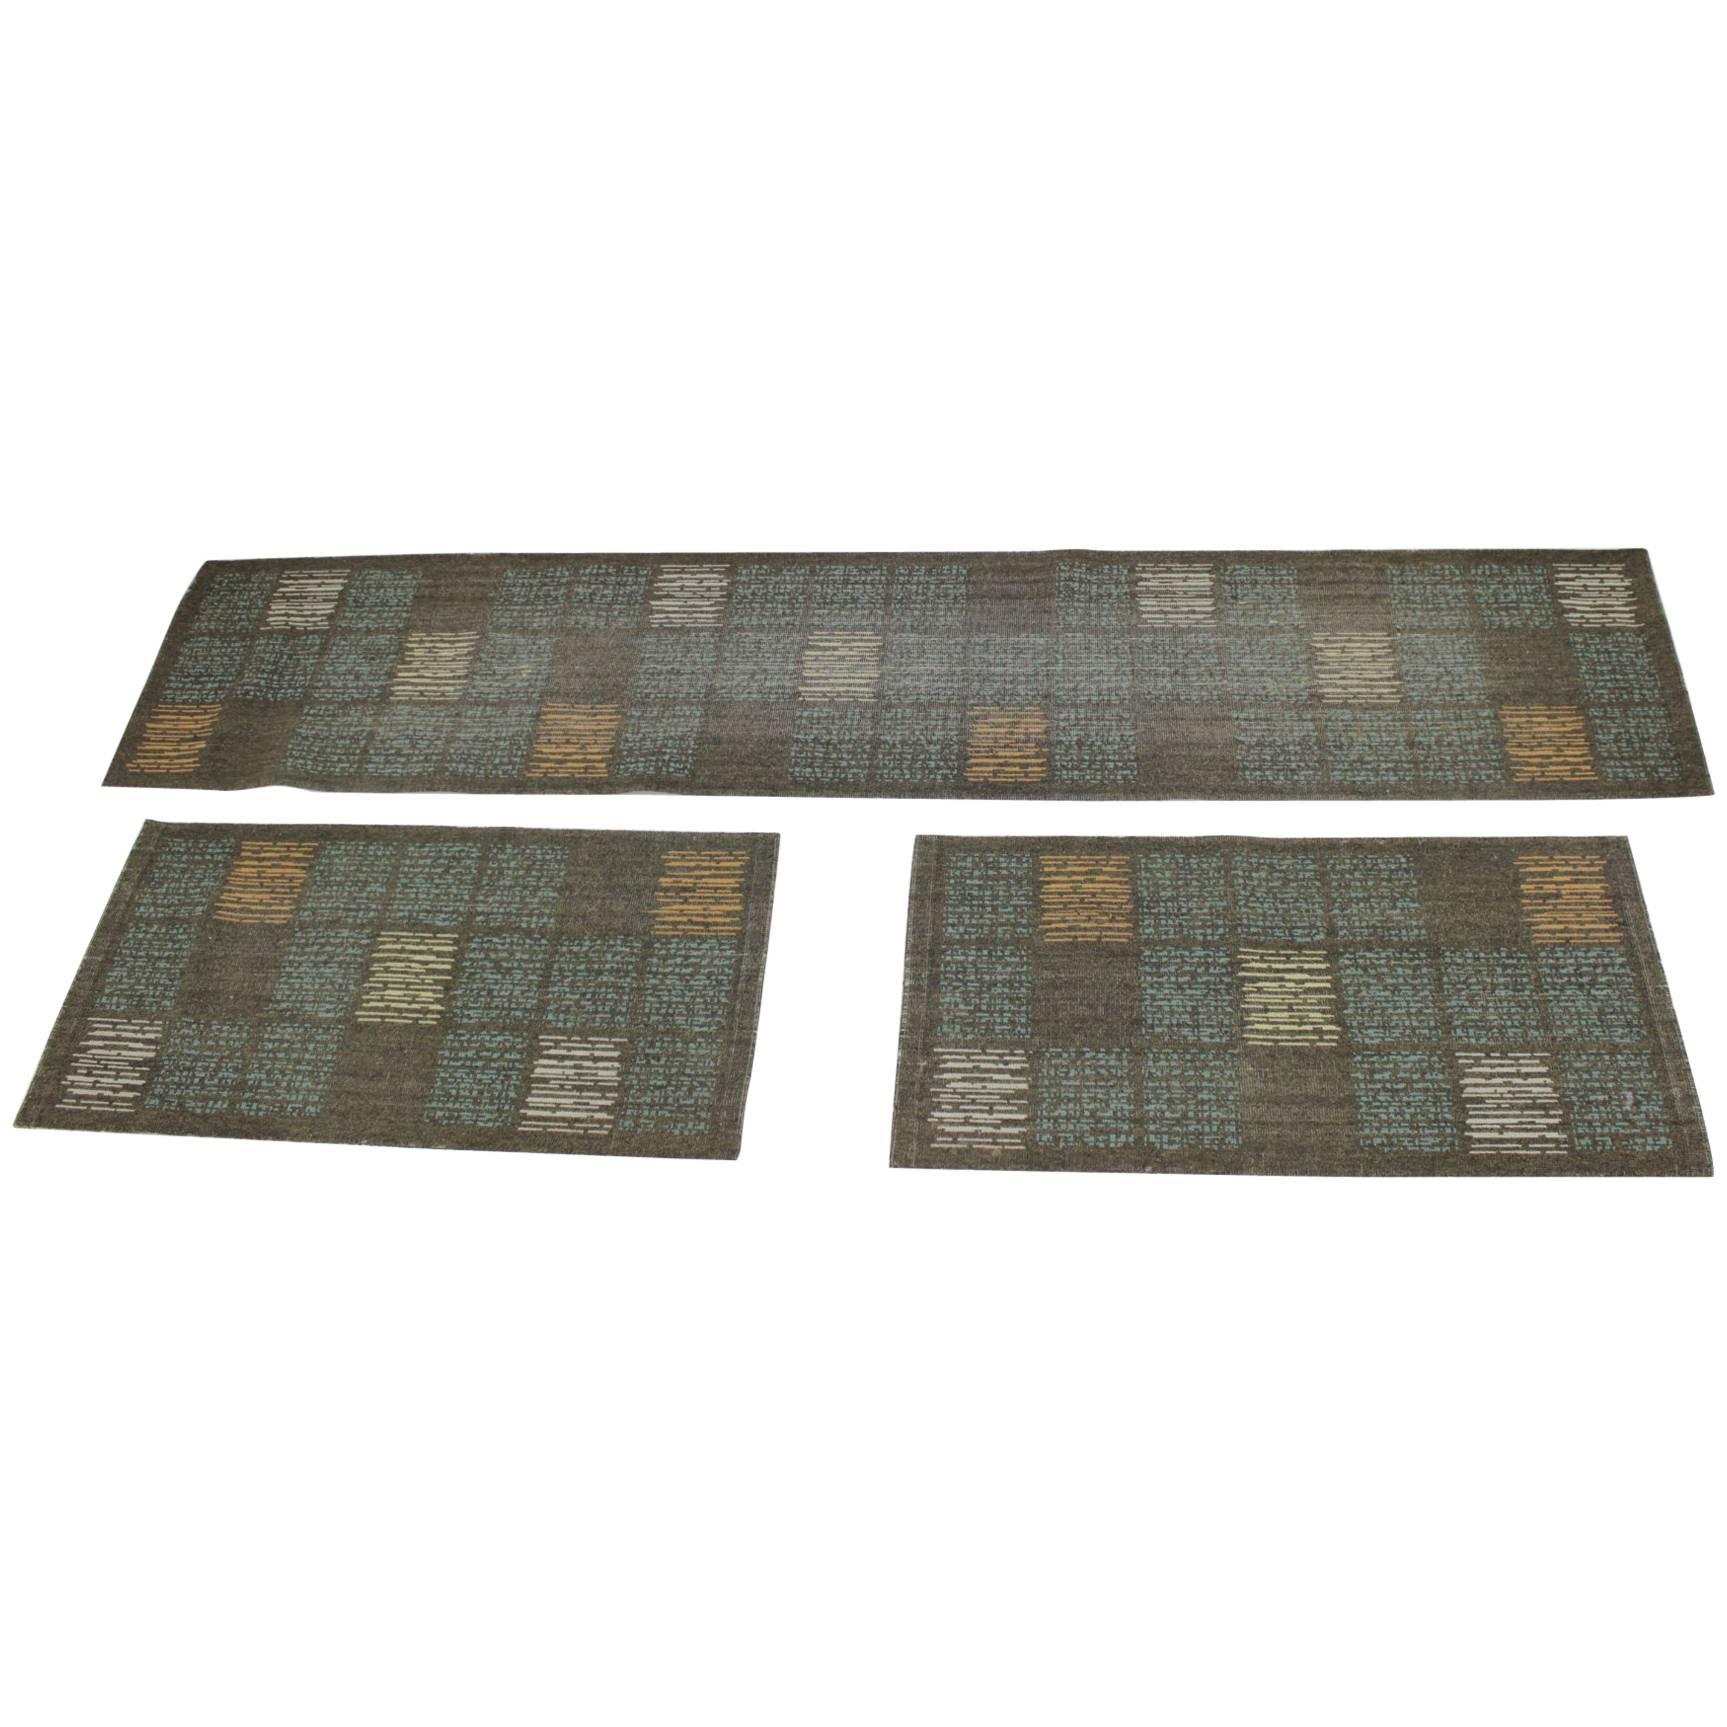 Set of Three Design Carpets / Rugs For Sale